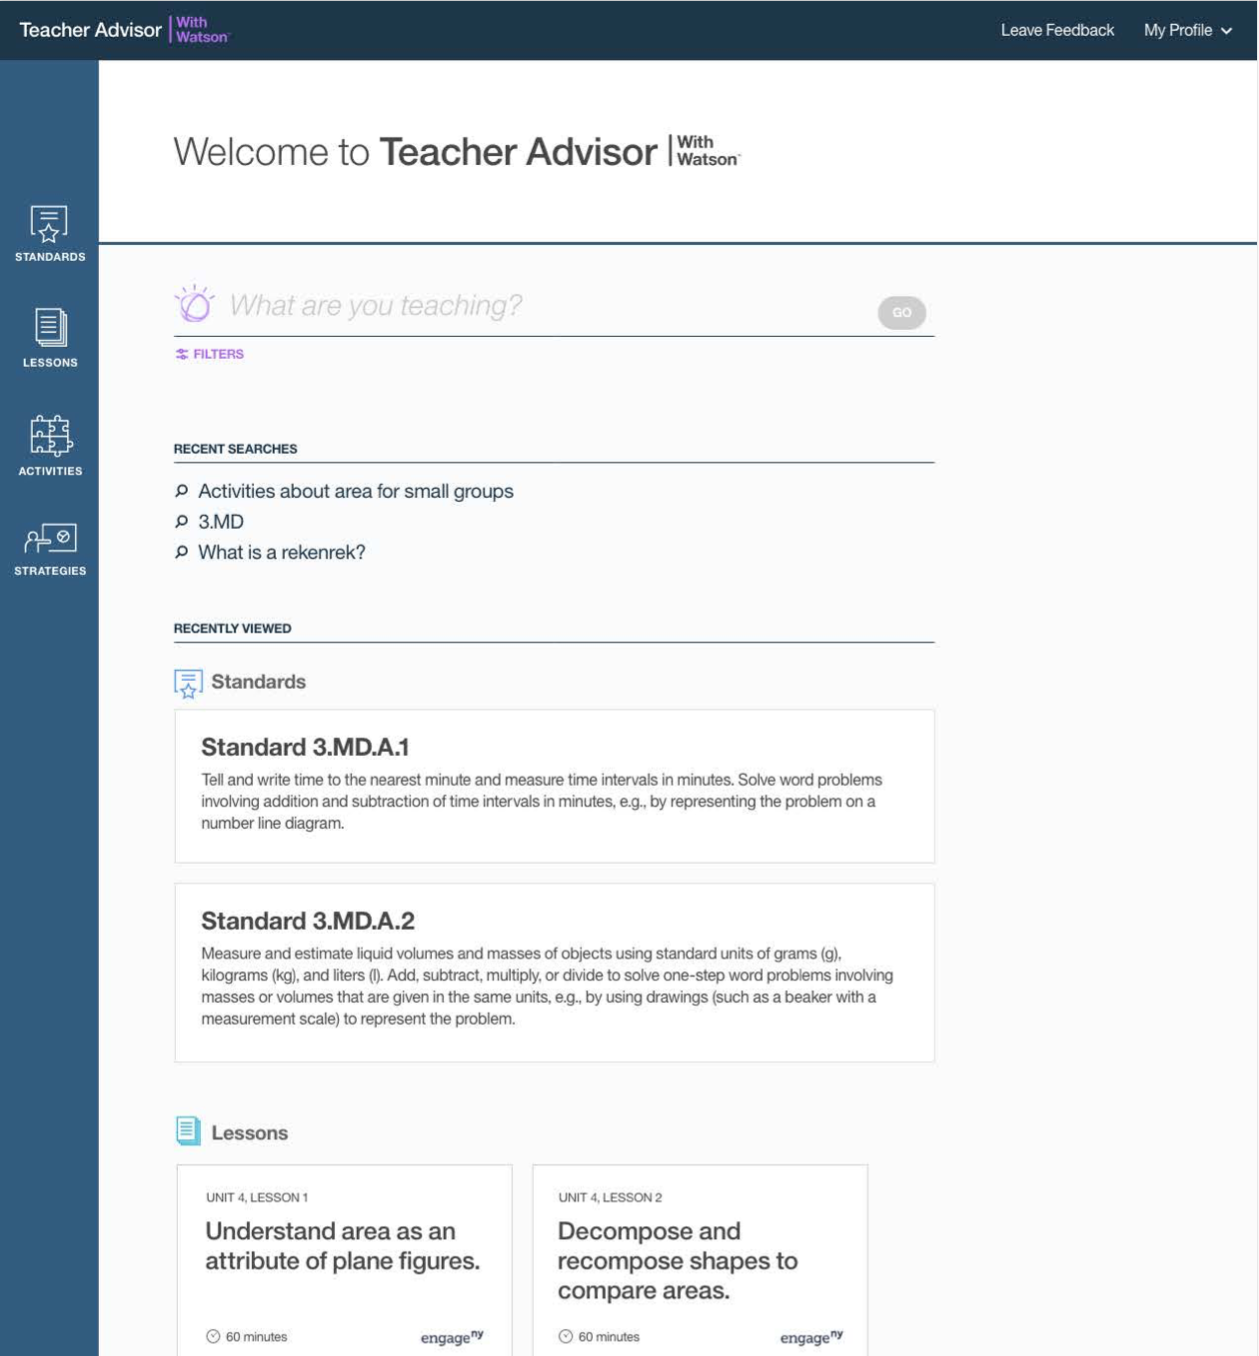 final home page of teacher advisor with watson - watson is a main search element with recent searches, recently viewed standards and lessons